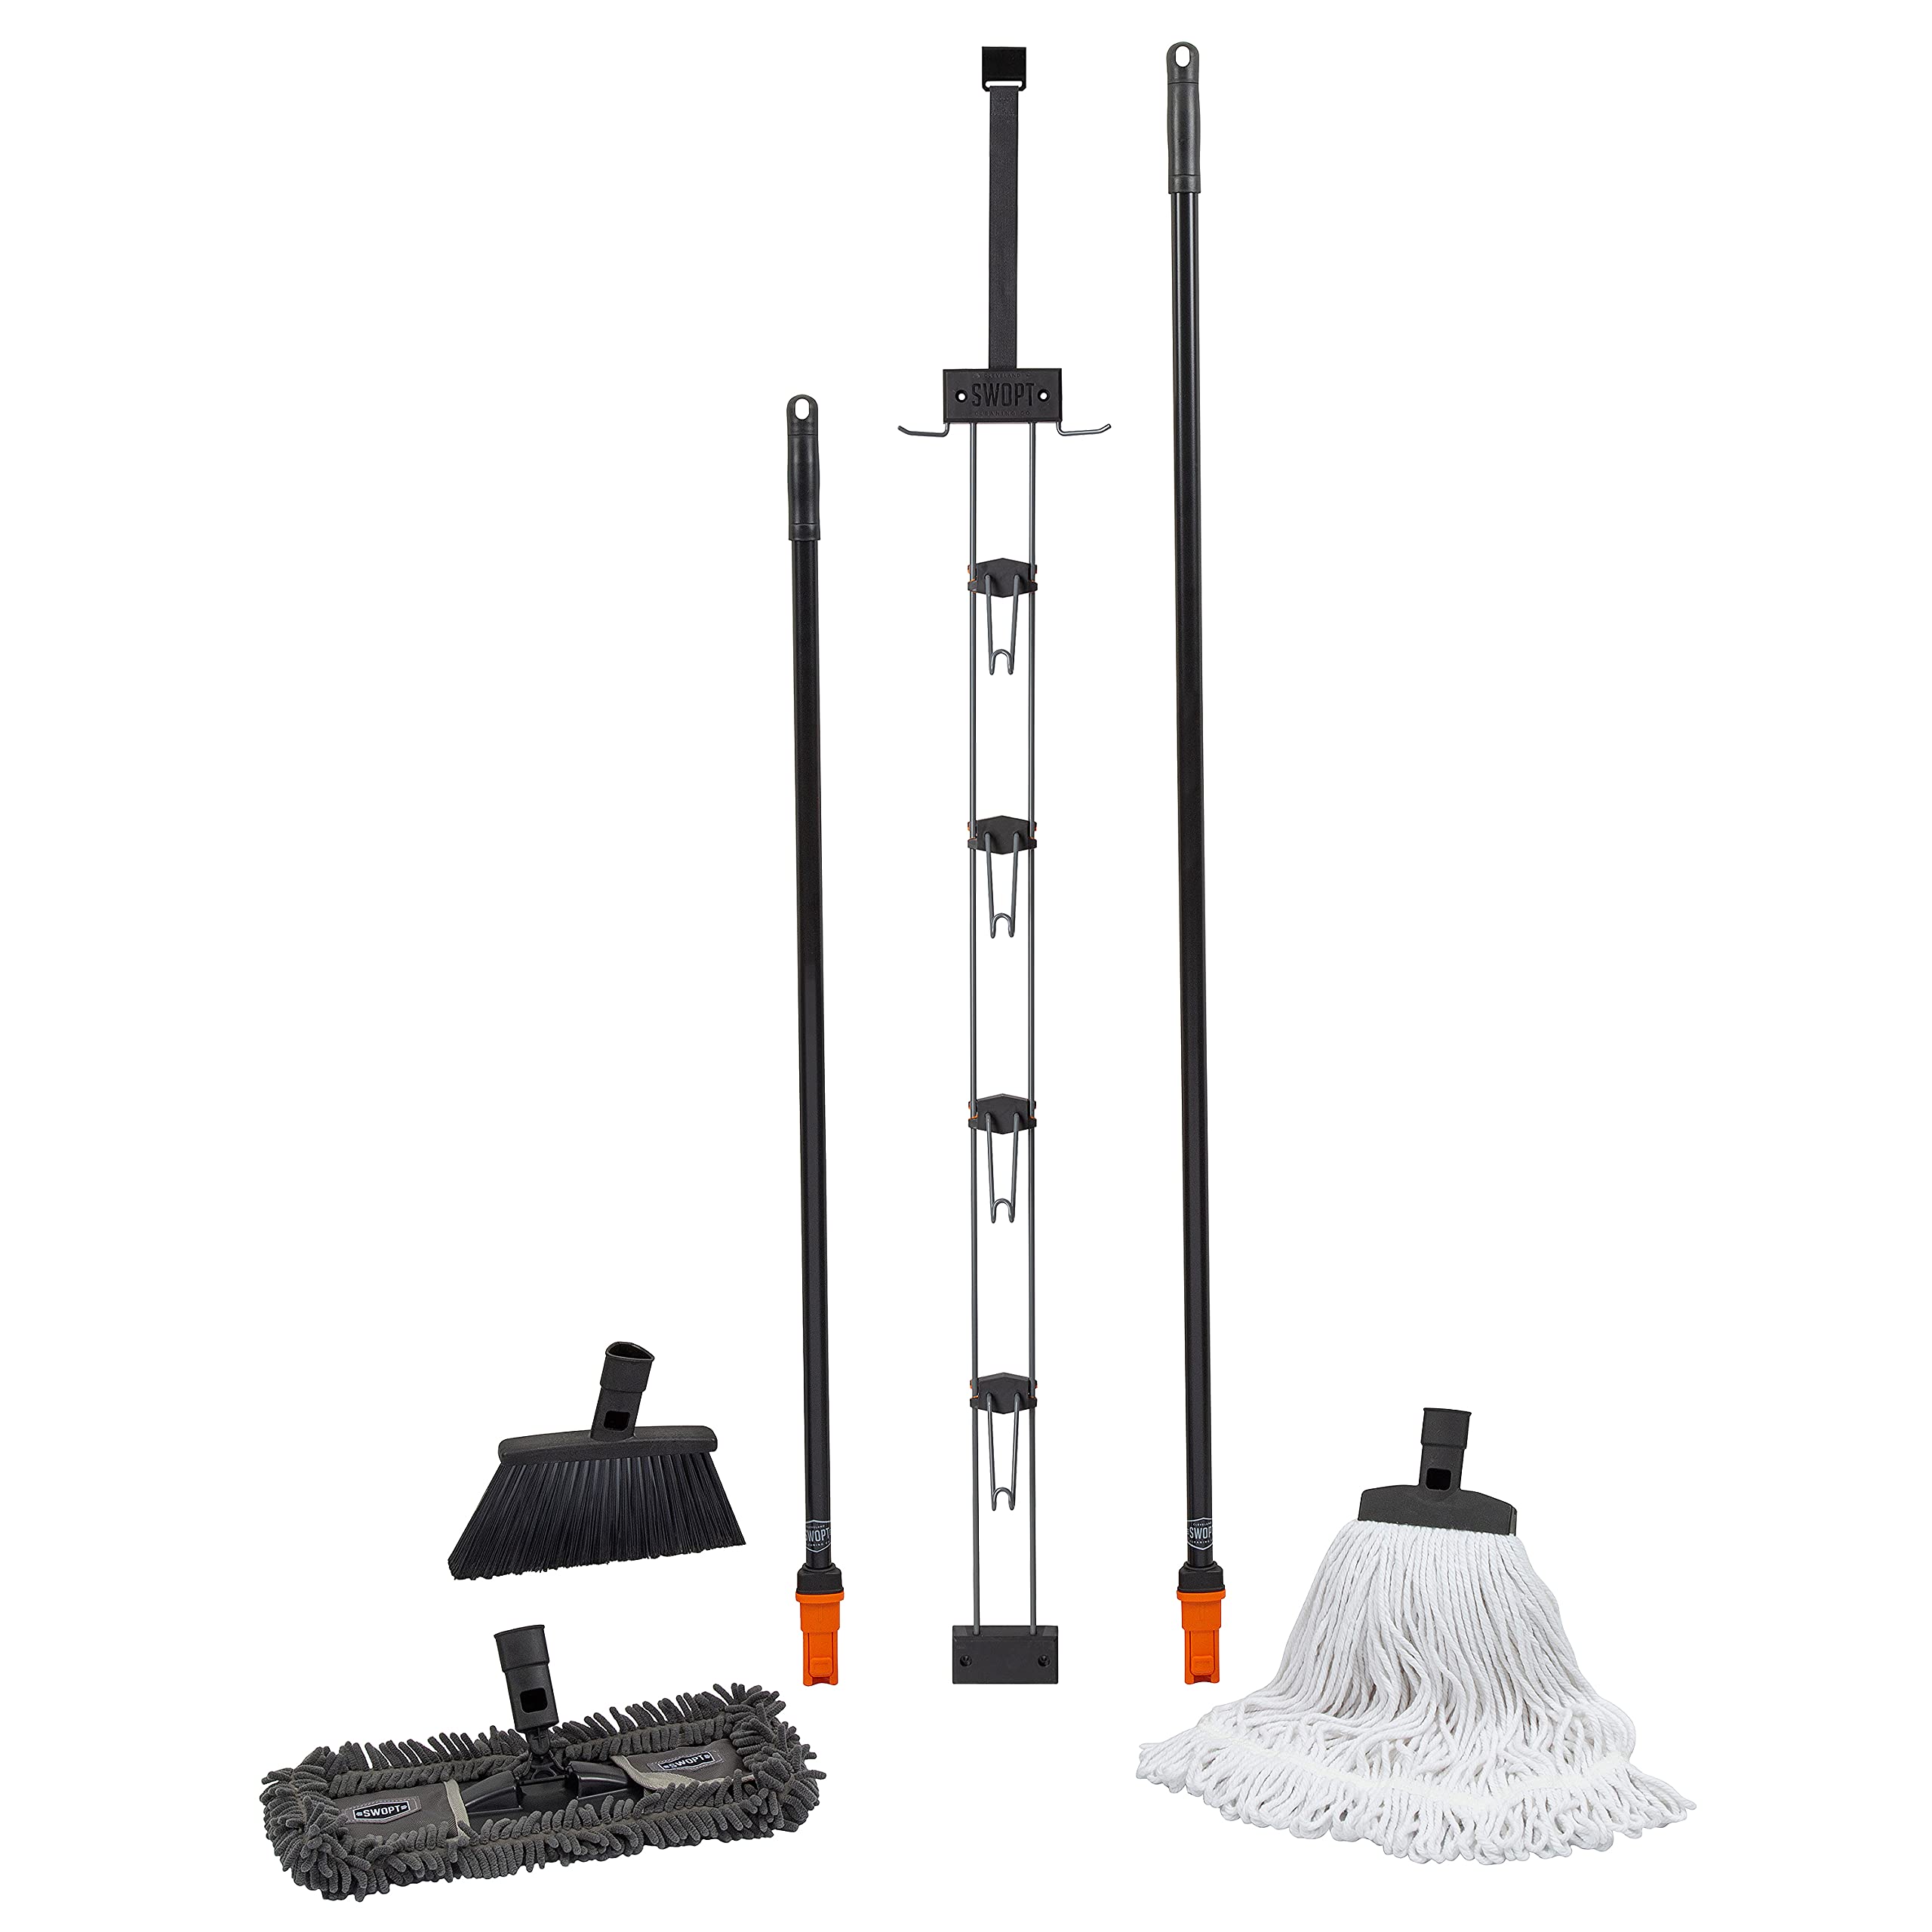 SWOPT Indoor Kit — Includes 18” Dust Mop, Cotton Mop, Angle Broom, 48” and 60” Steel Handles, and Organizer — Cleaning Heads with Long Handle Inter...